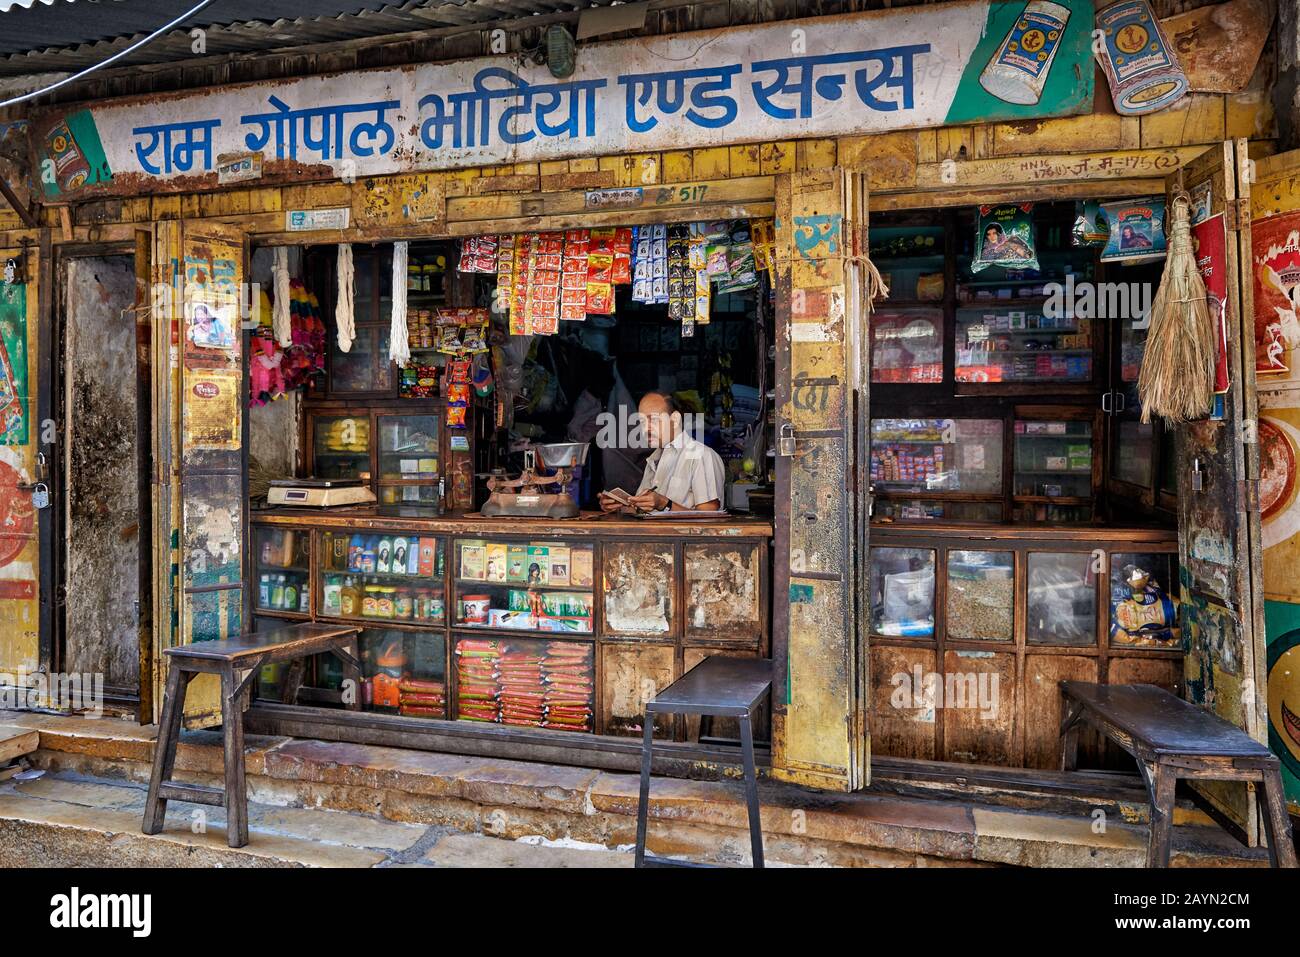 typical local shop in Jaisalmer, Rajasthan, India Stock Photo